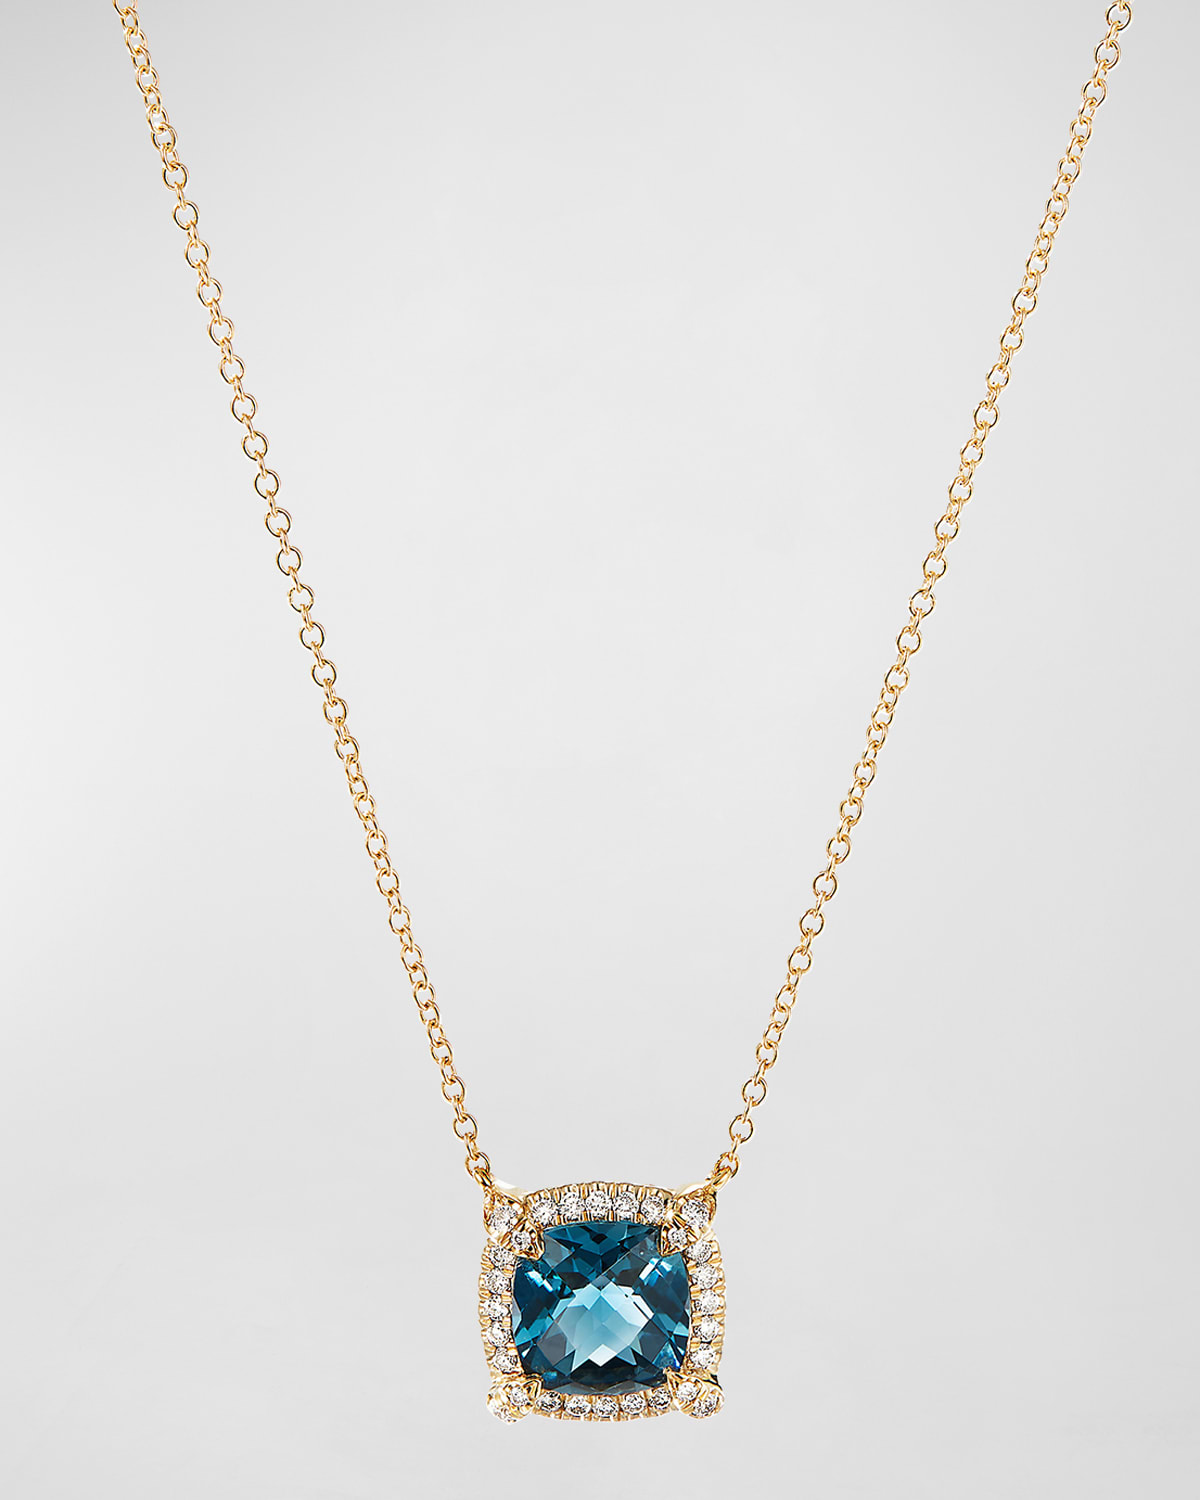 Shop David Yurman Petite Chatelaine Pave Bezel Pendant Necklace In 18k Yellow Gold With Pink Tourmaline In 15 Blue